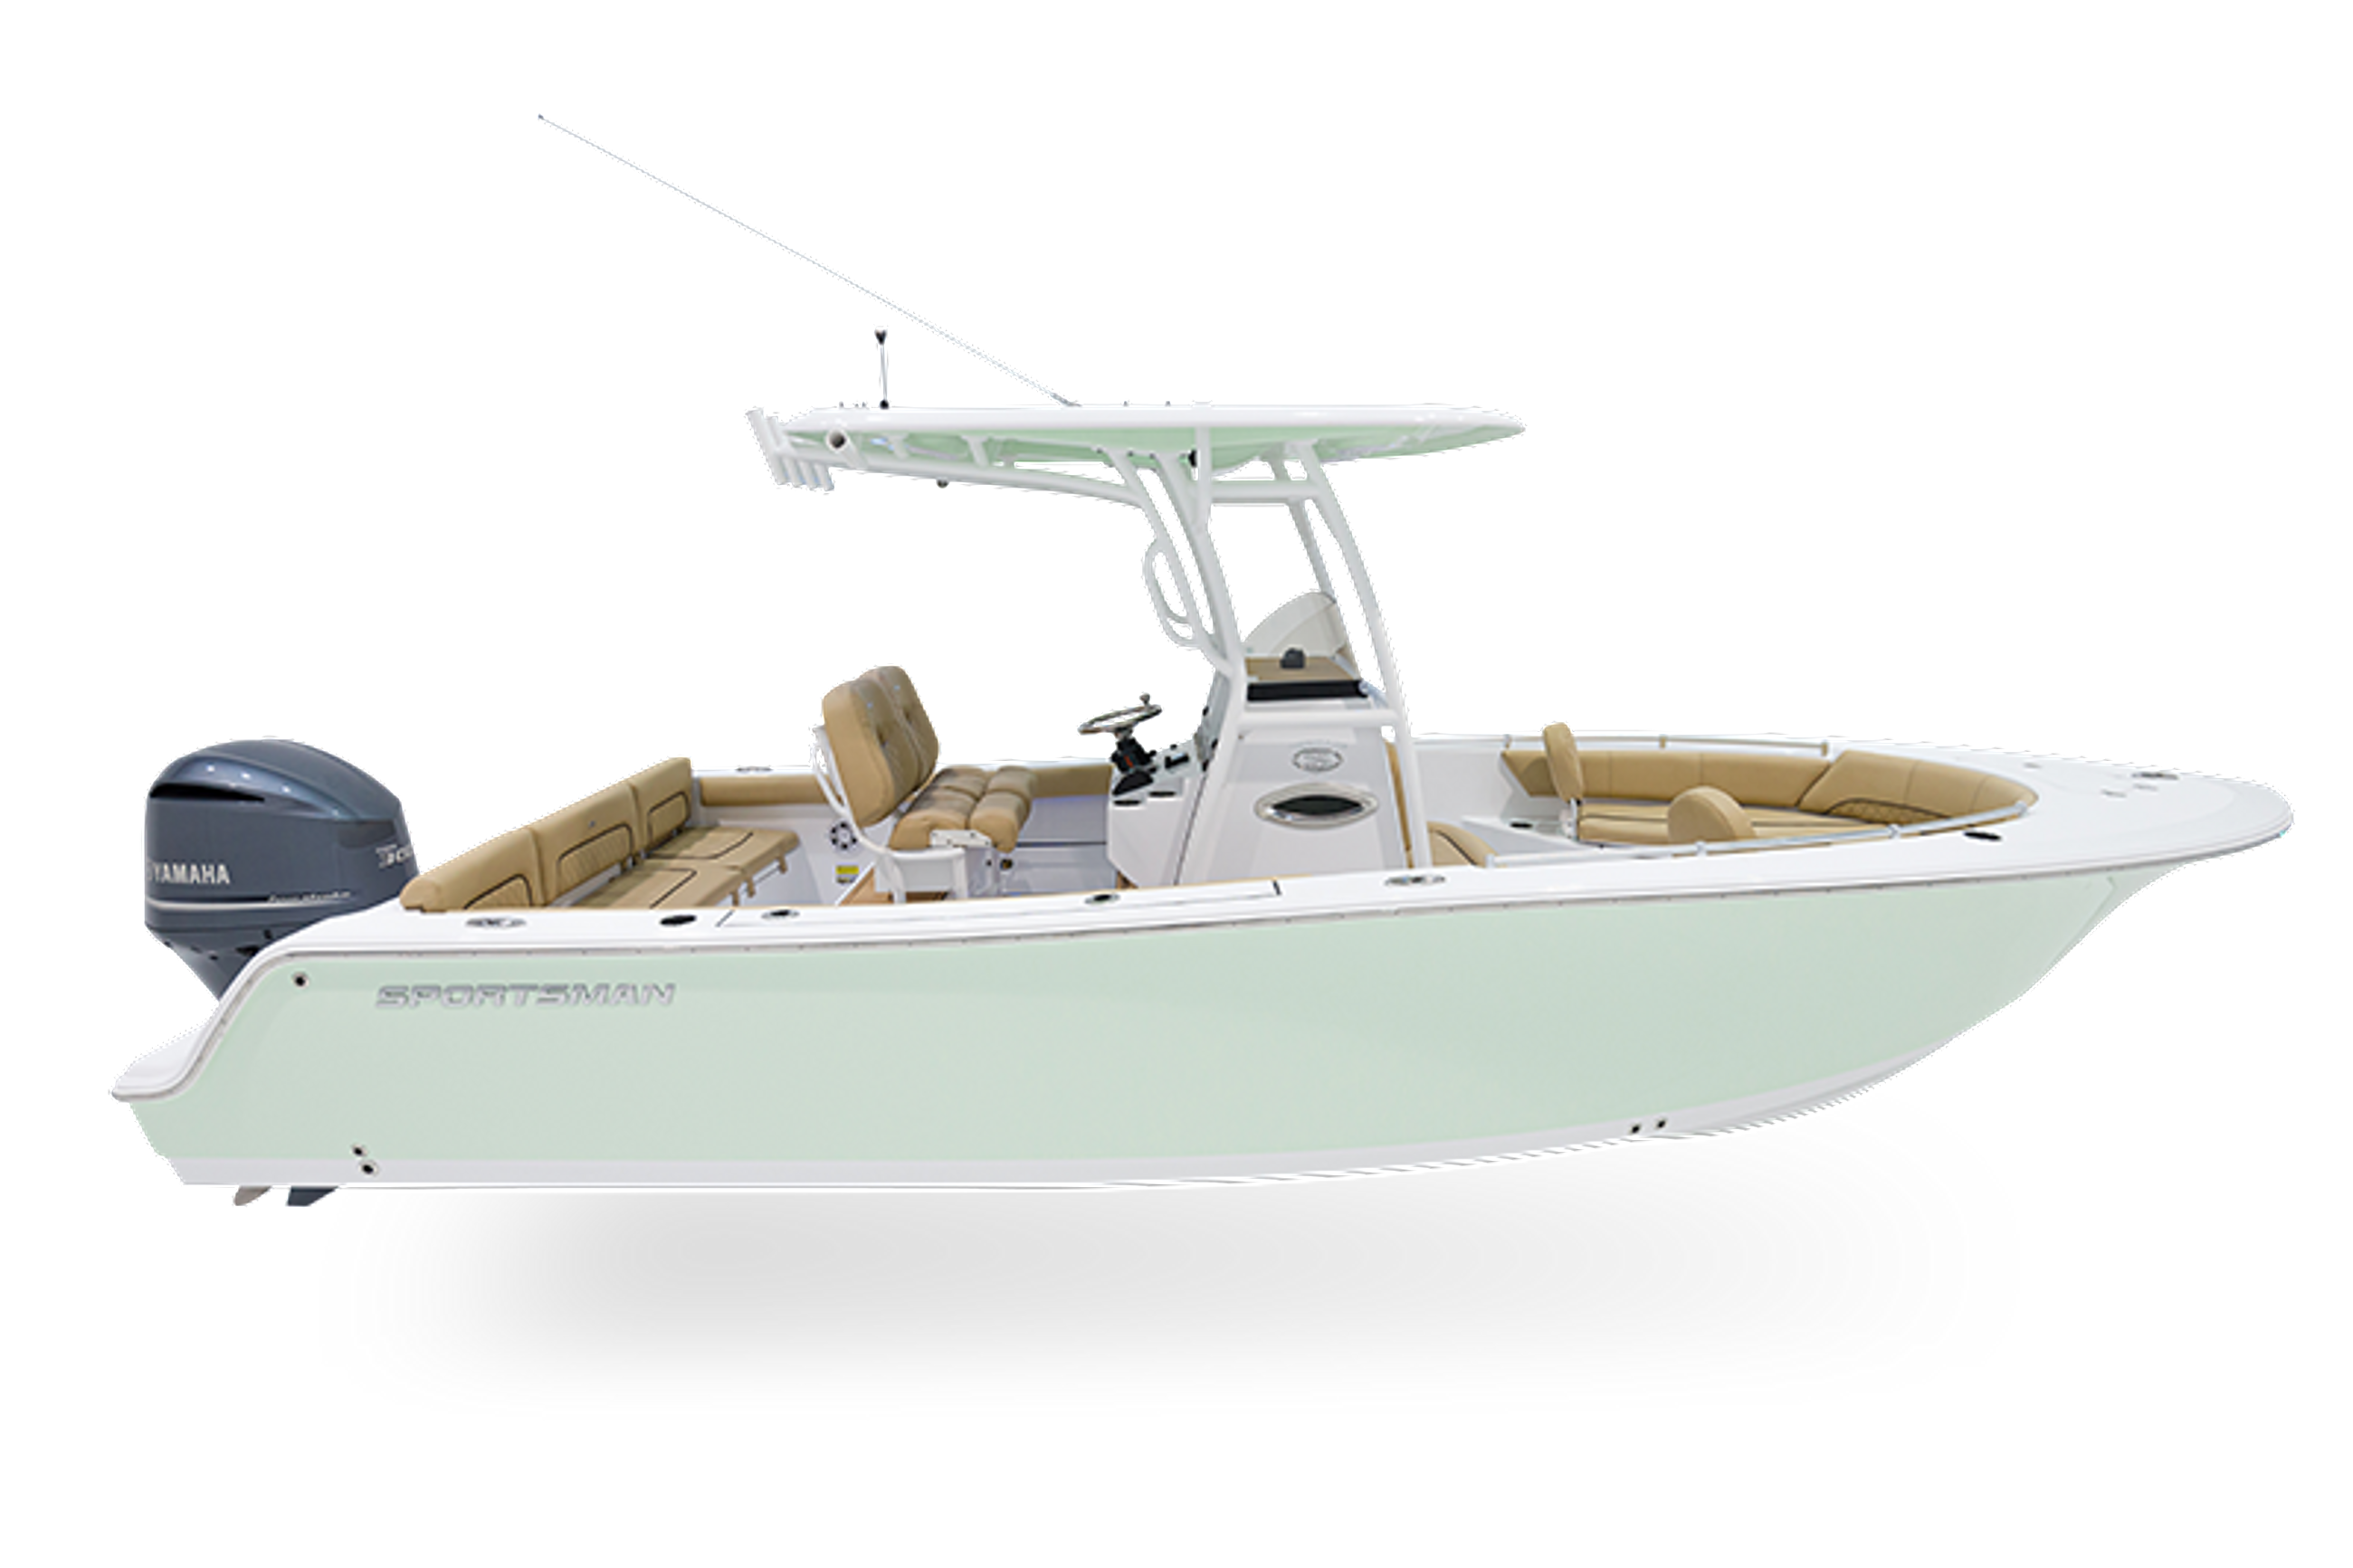 Studio image for Heritage 241 Center Console